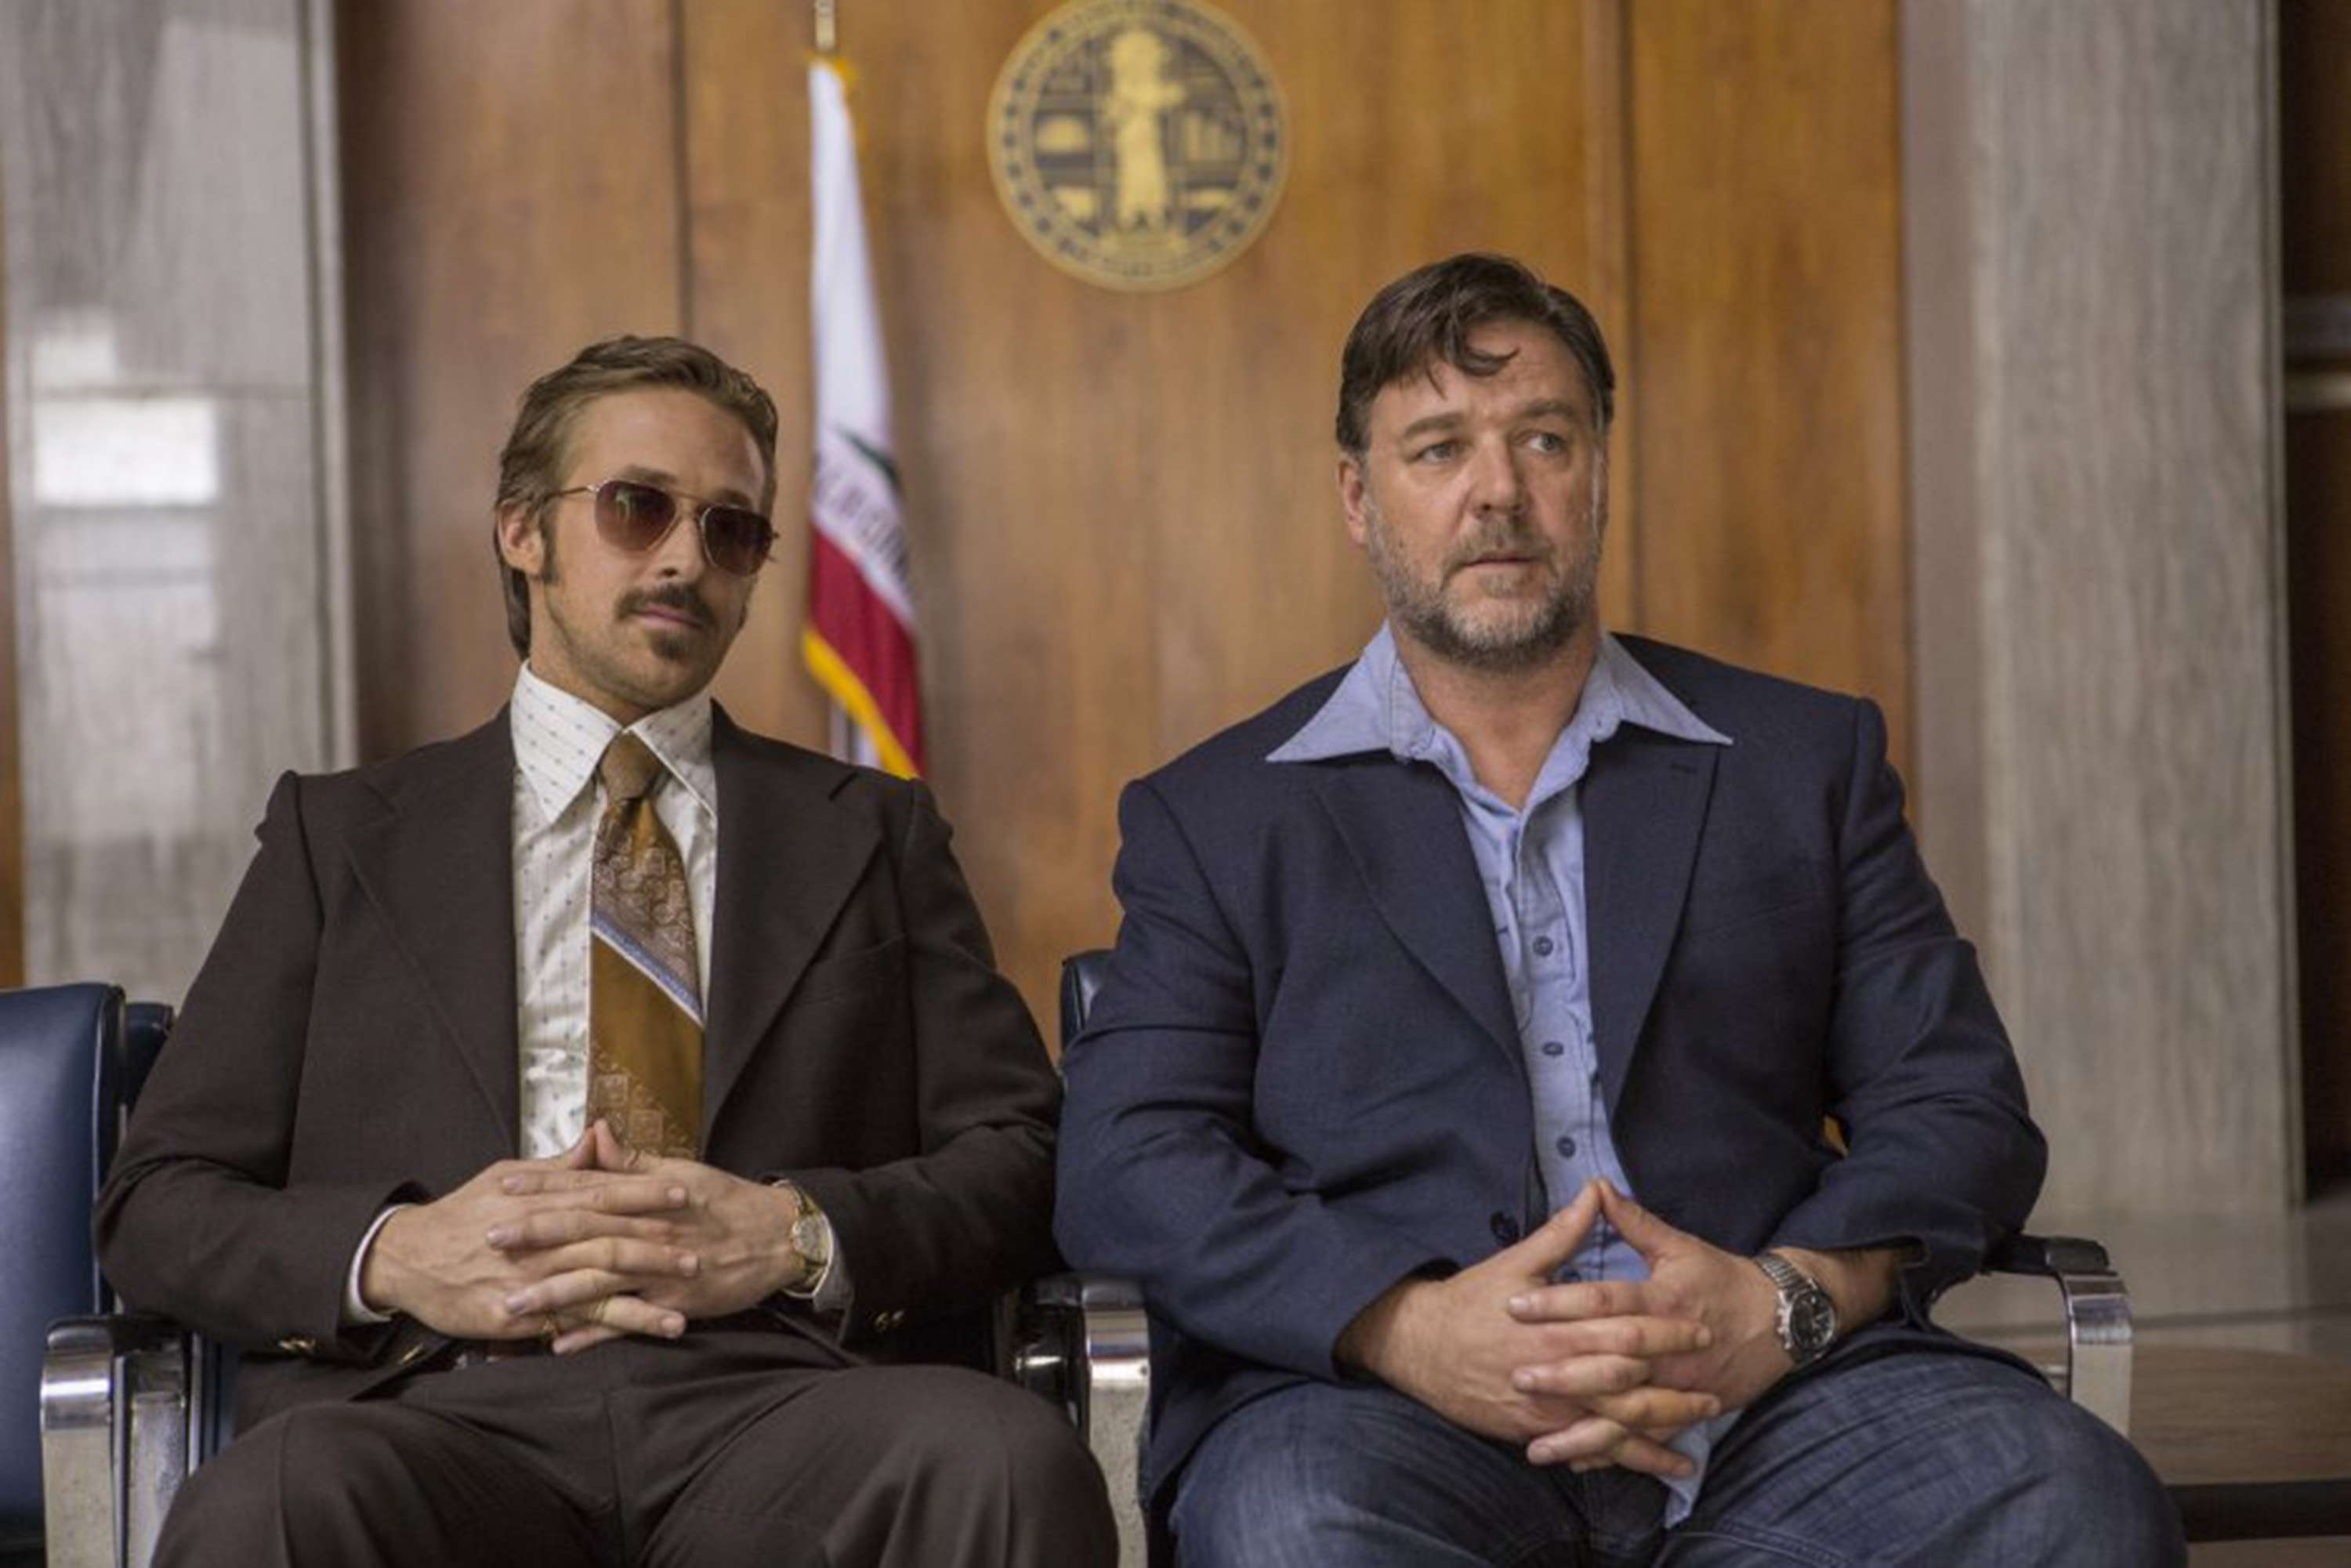 Russell Crowe (right) and Ryan Gosling in a still from The Nice Guys. Photos AFP